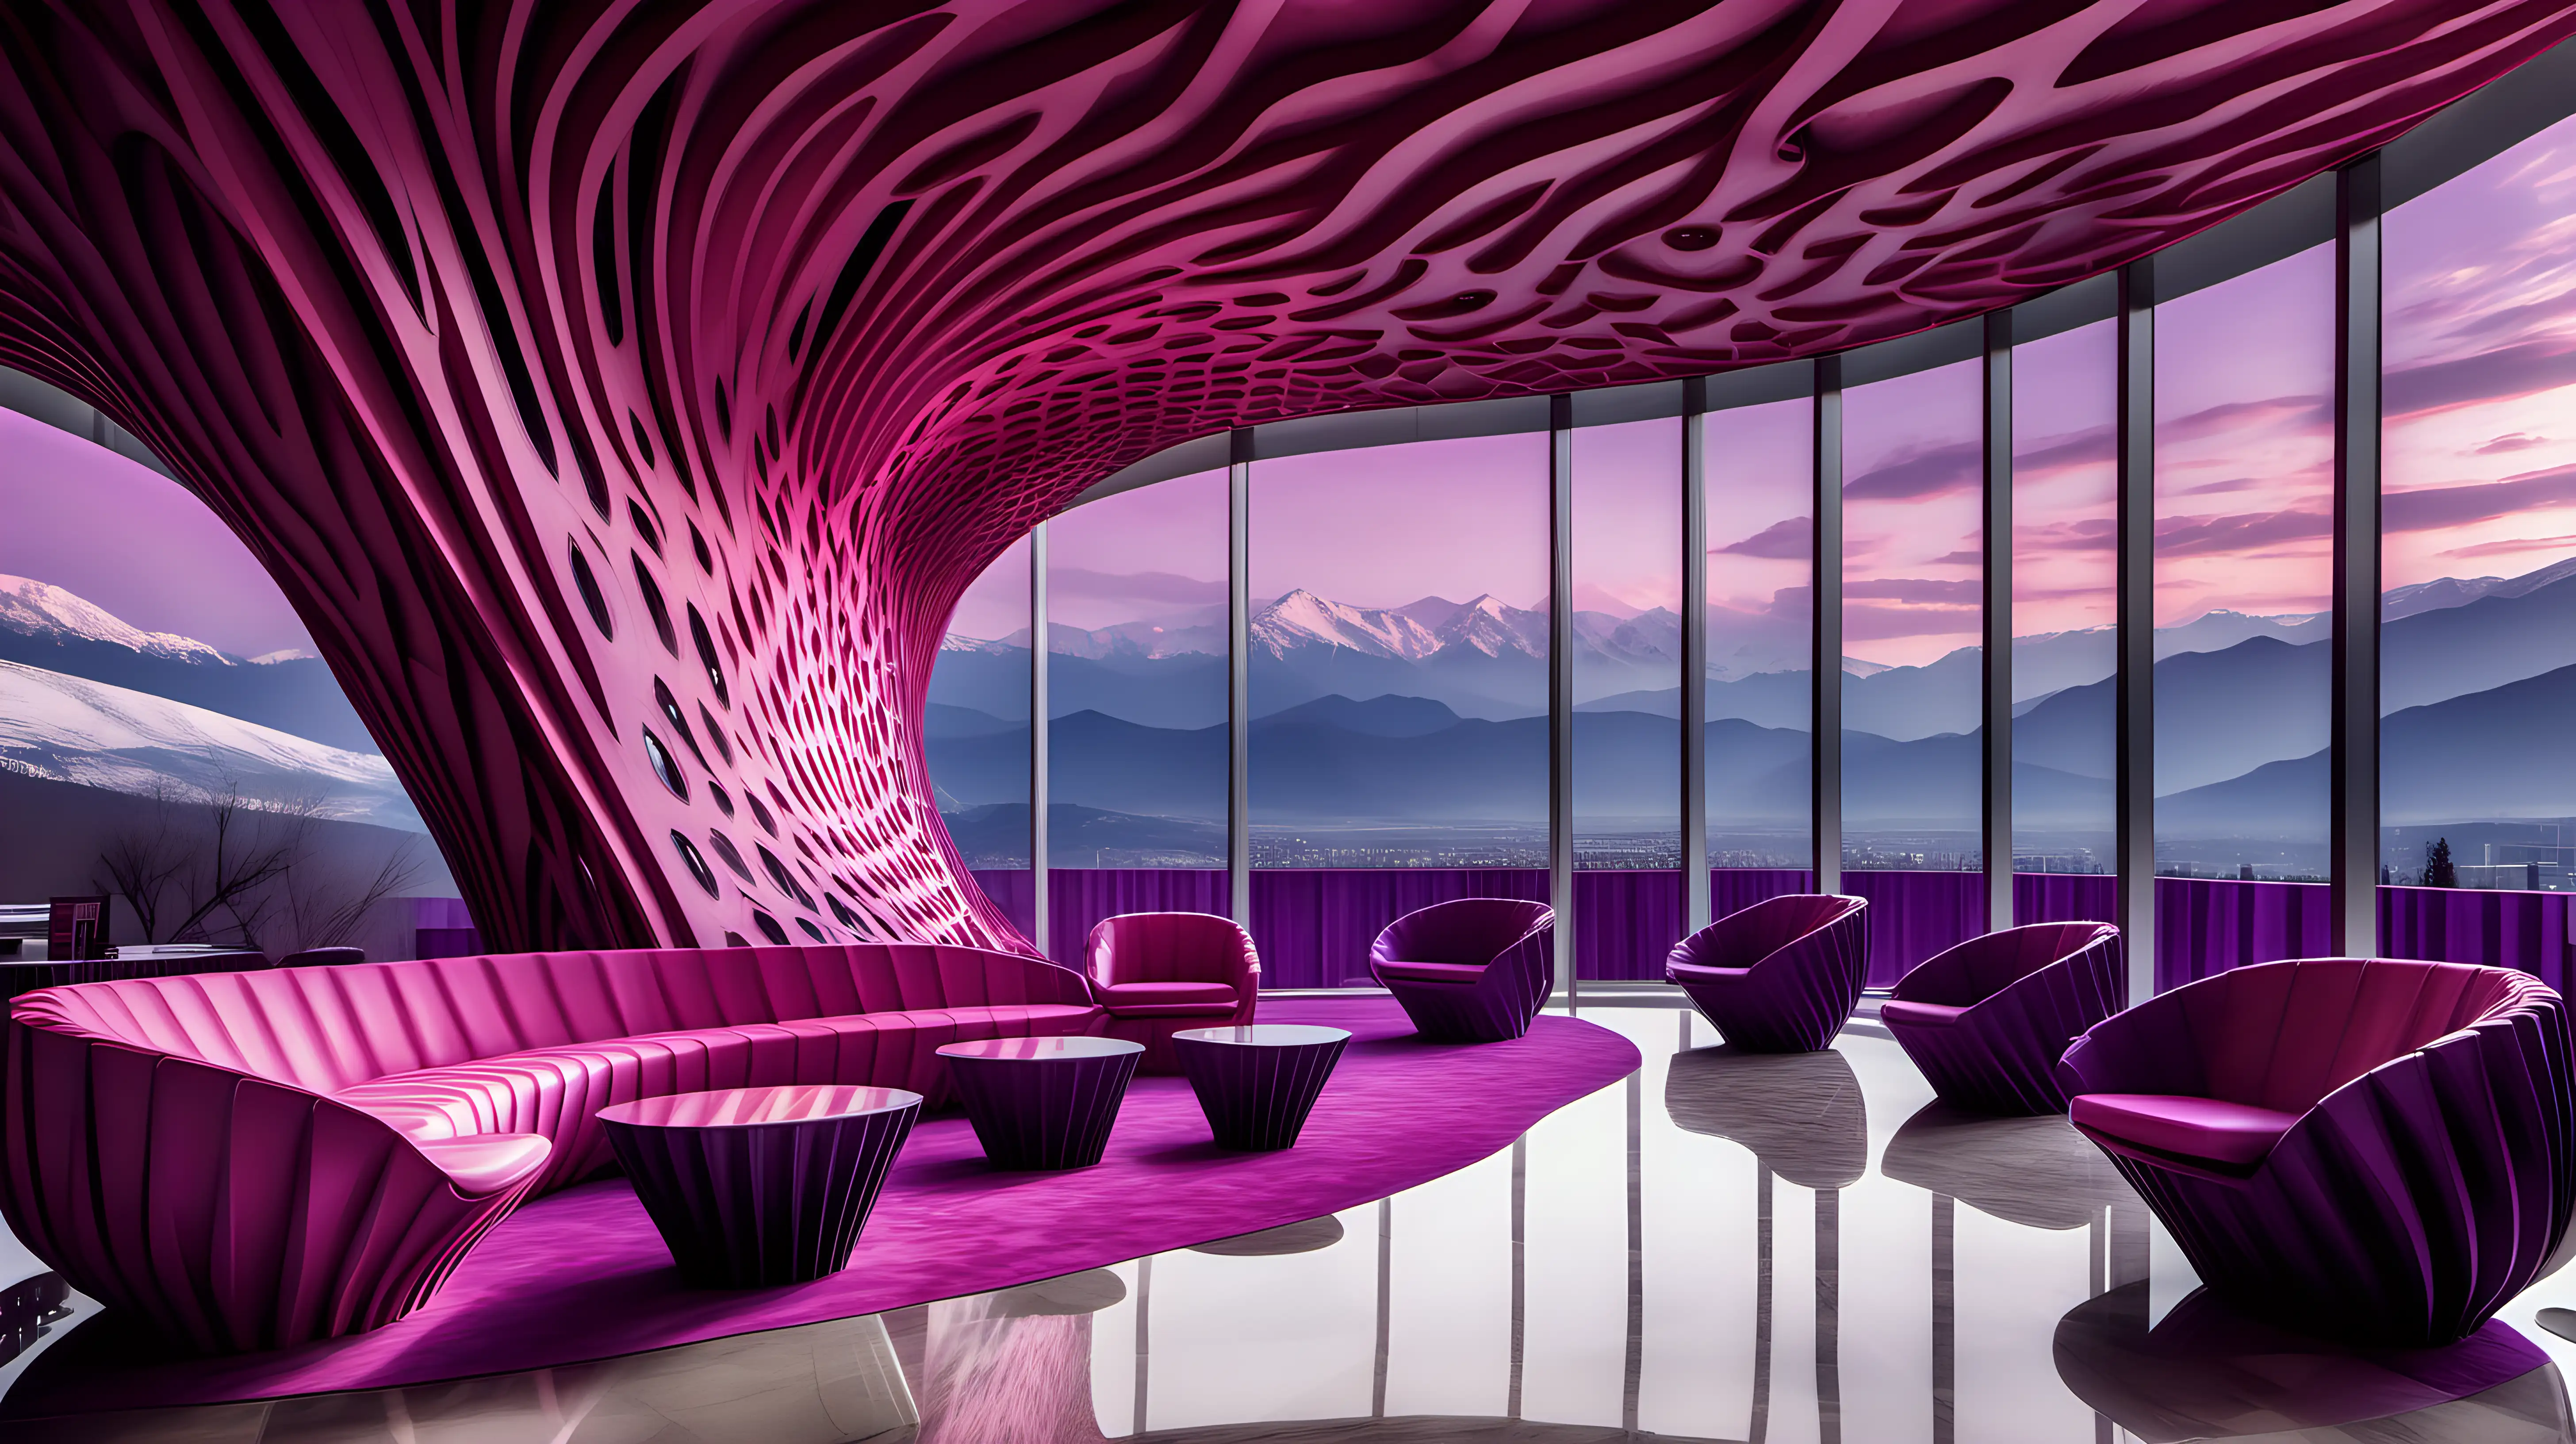 Super Modern Parametric Architecture Hotel Lobby with Pink and Purple Colors and Mountain View